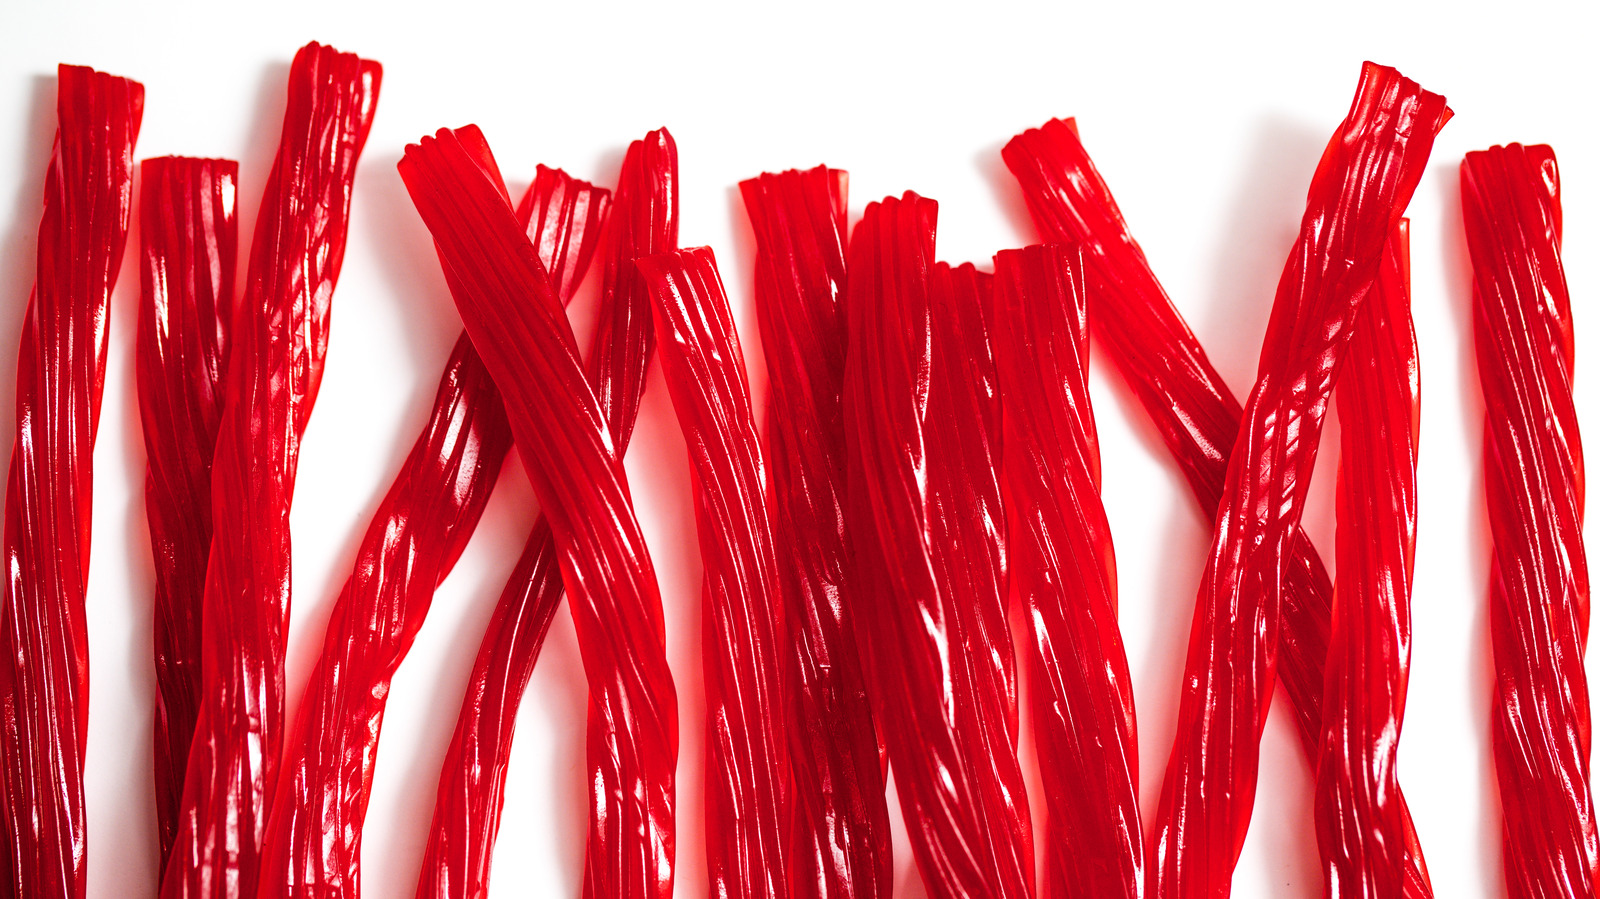 Cornwall FALSK sammensværgelse Red Vines Vs. Twizzlers: What's The Difference?